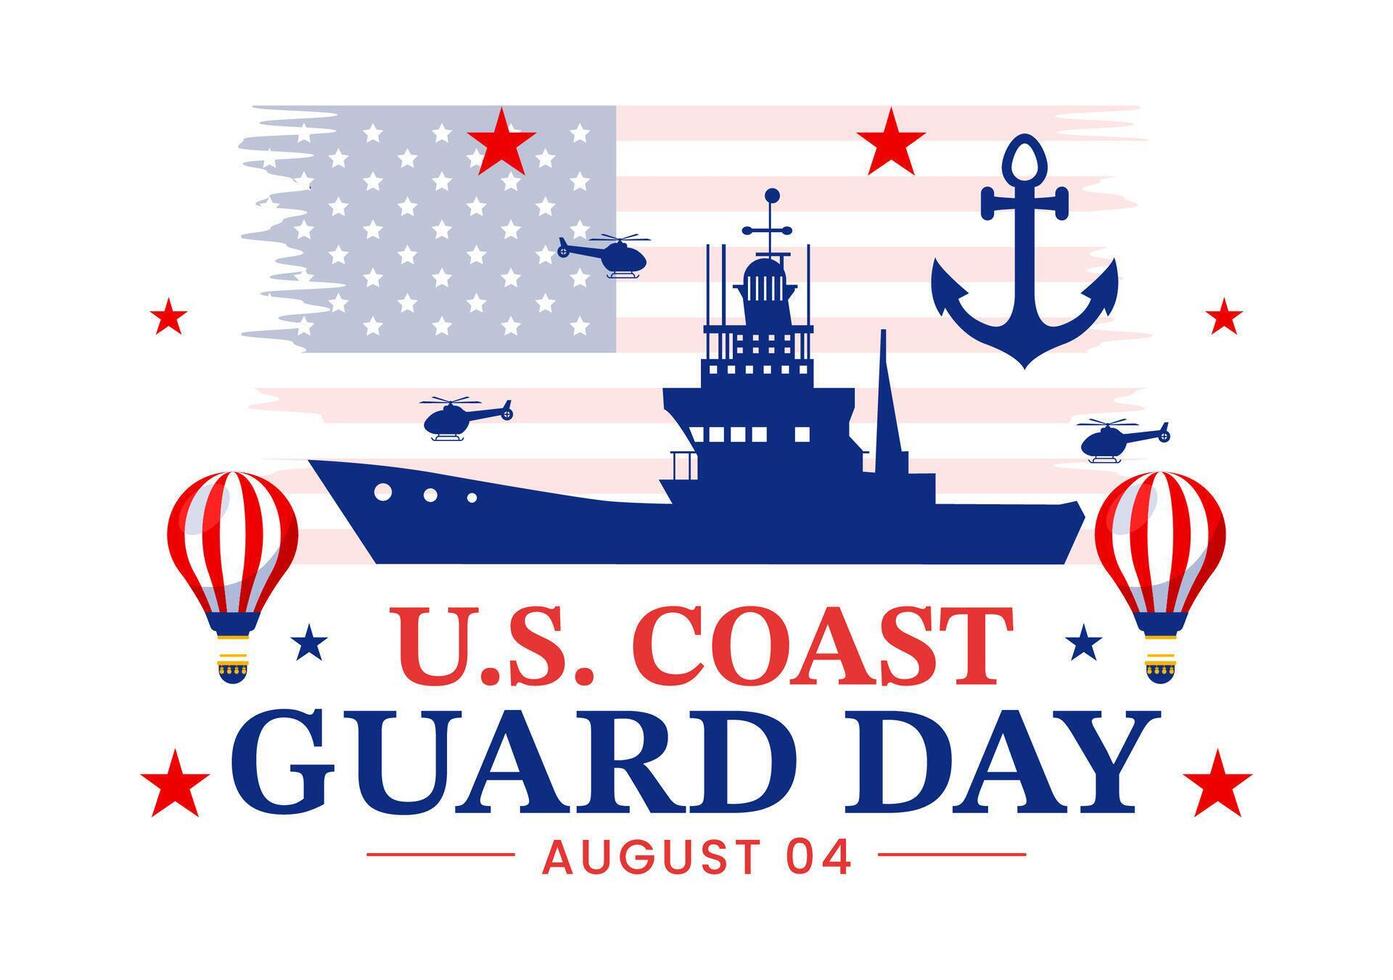 United States Coast Guard Day Illustration on August 4 with American Waving Flag and Ship in National Holiday Flat Cartoon Background vector